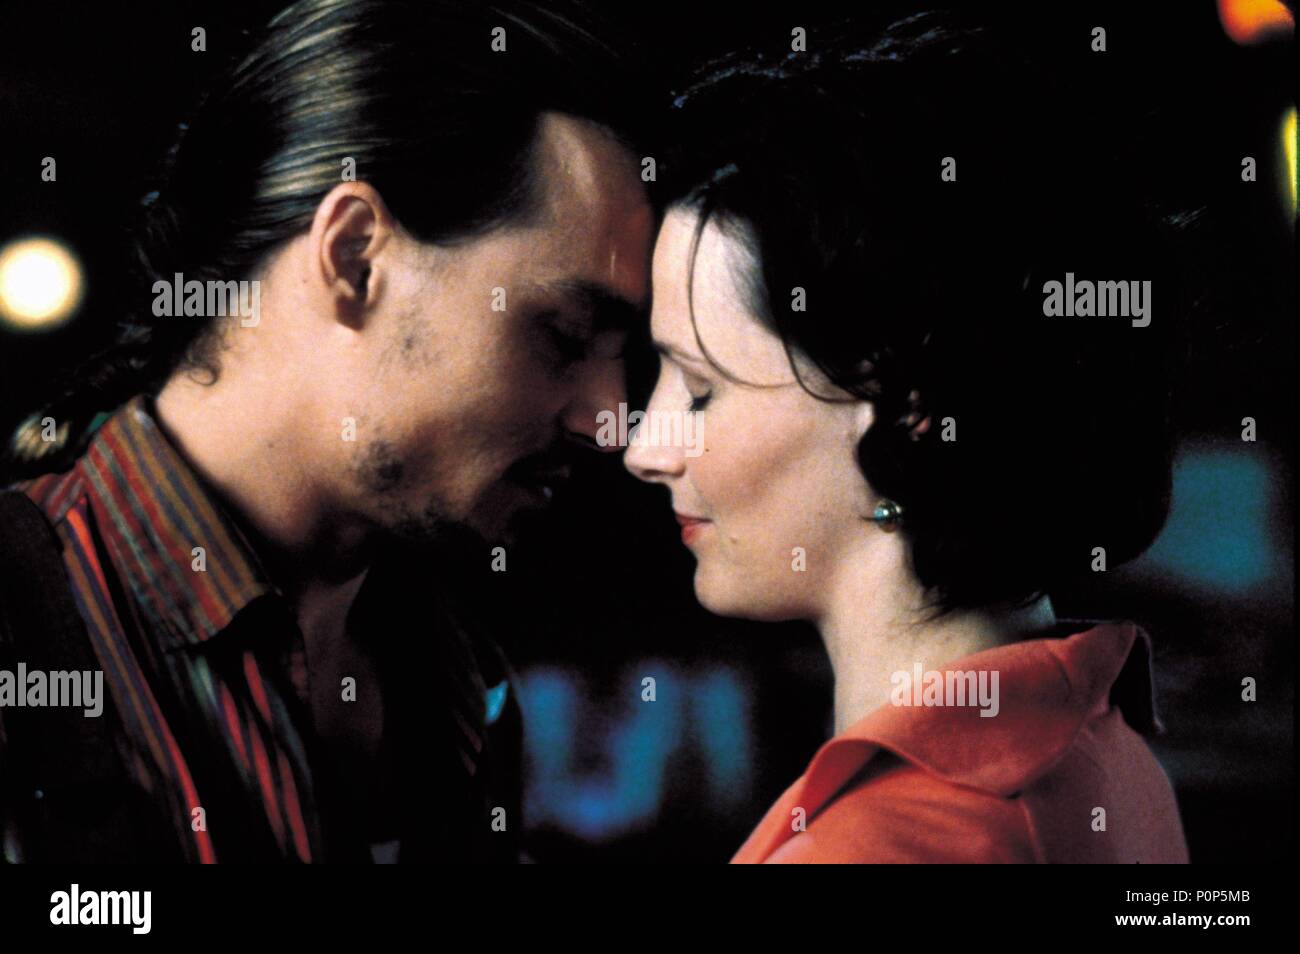 Original Film Title: CHOCOLAT.  English Title: CHOCOLAT.  Film Director: LASSE HALLSTROM.  Year: 2000.  Stars: JOHNNY DEPP; JULIETTE BINOCHE. Copyright: Editorial inside use only. This is a publicly distributed handout. Access rights only, no license of copyright provided. Mandatory authorization to Visual Icon (www.visual-icon.com) is required for the reproduction of this image. Credit: MIRAMAX FILMS / APPLEBY, DAVID / Album Stock Photo